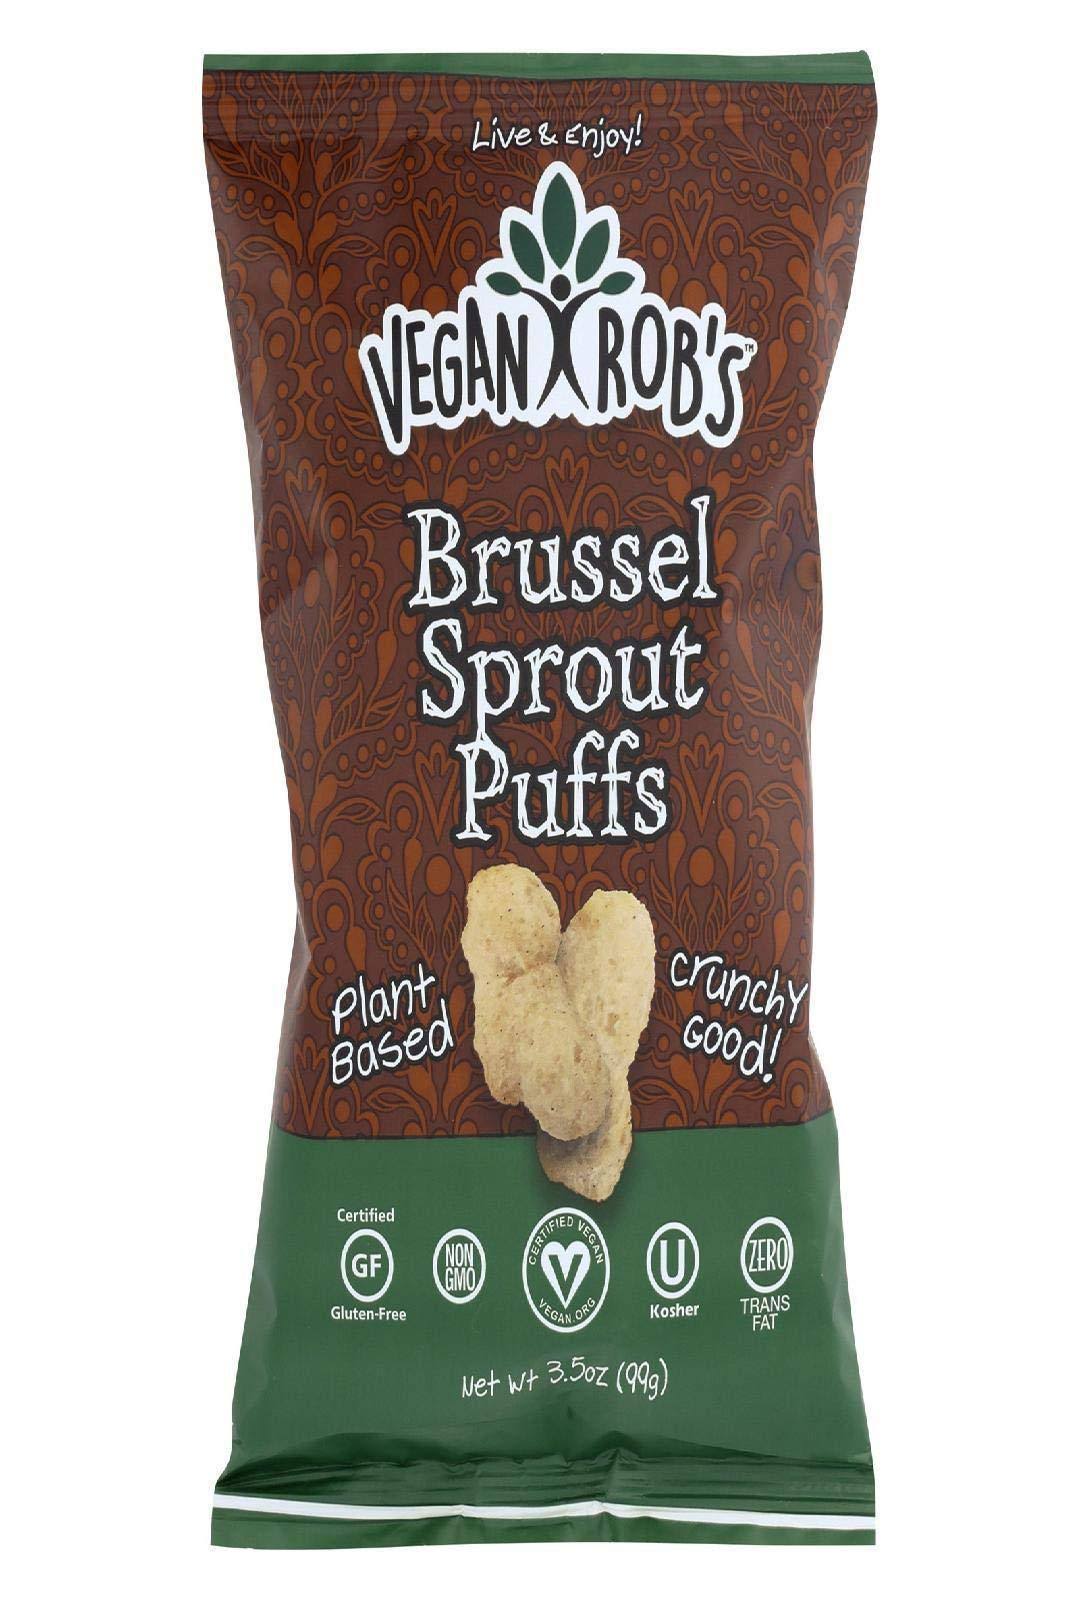 Vegan Rob's Sorghum Puffs, Brussels Sprout - 3.5 oz